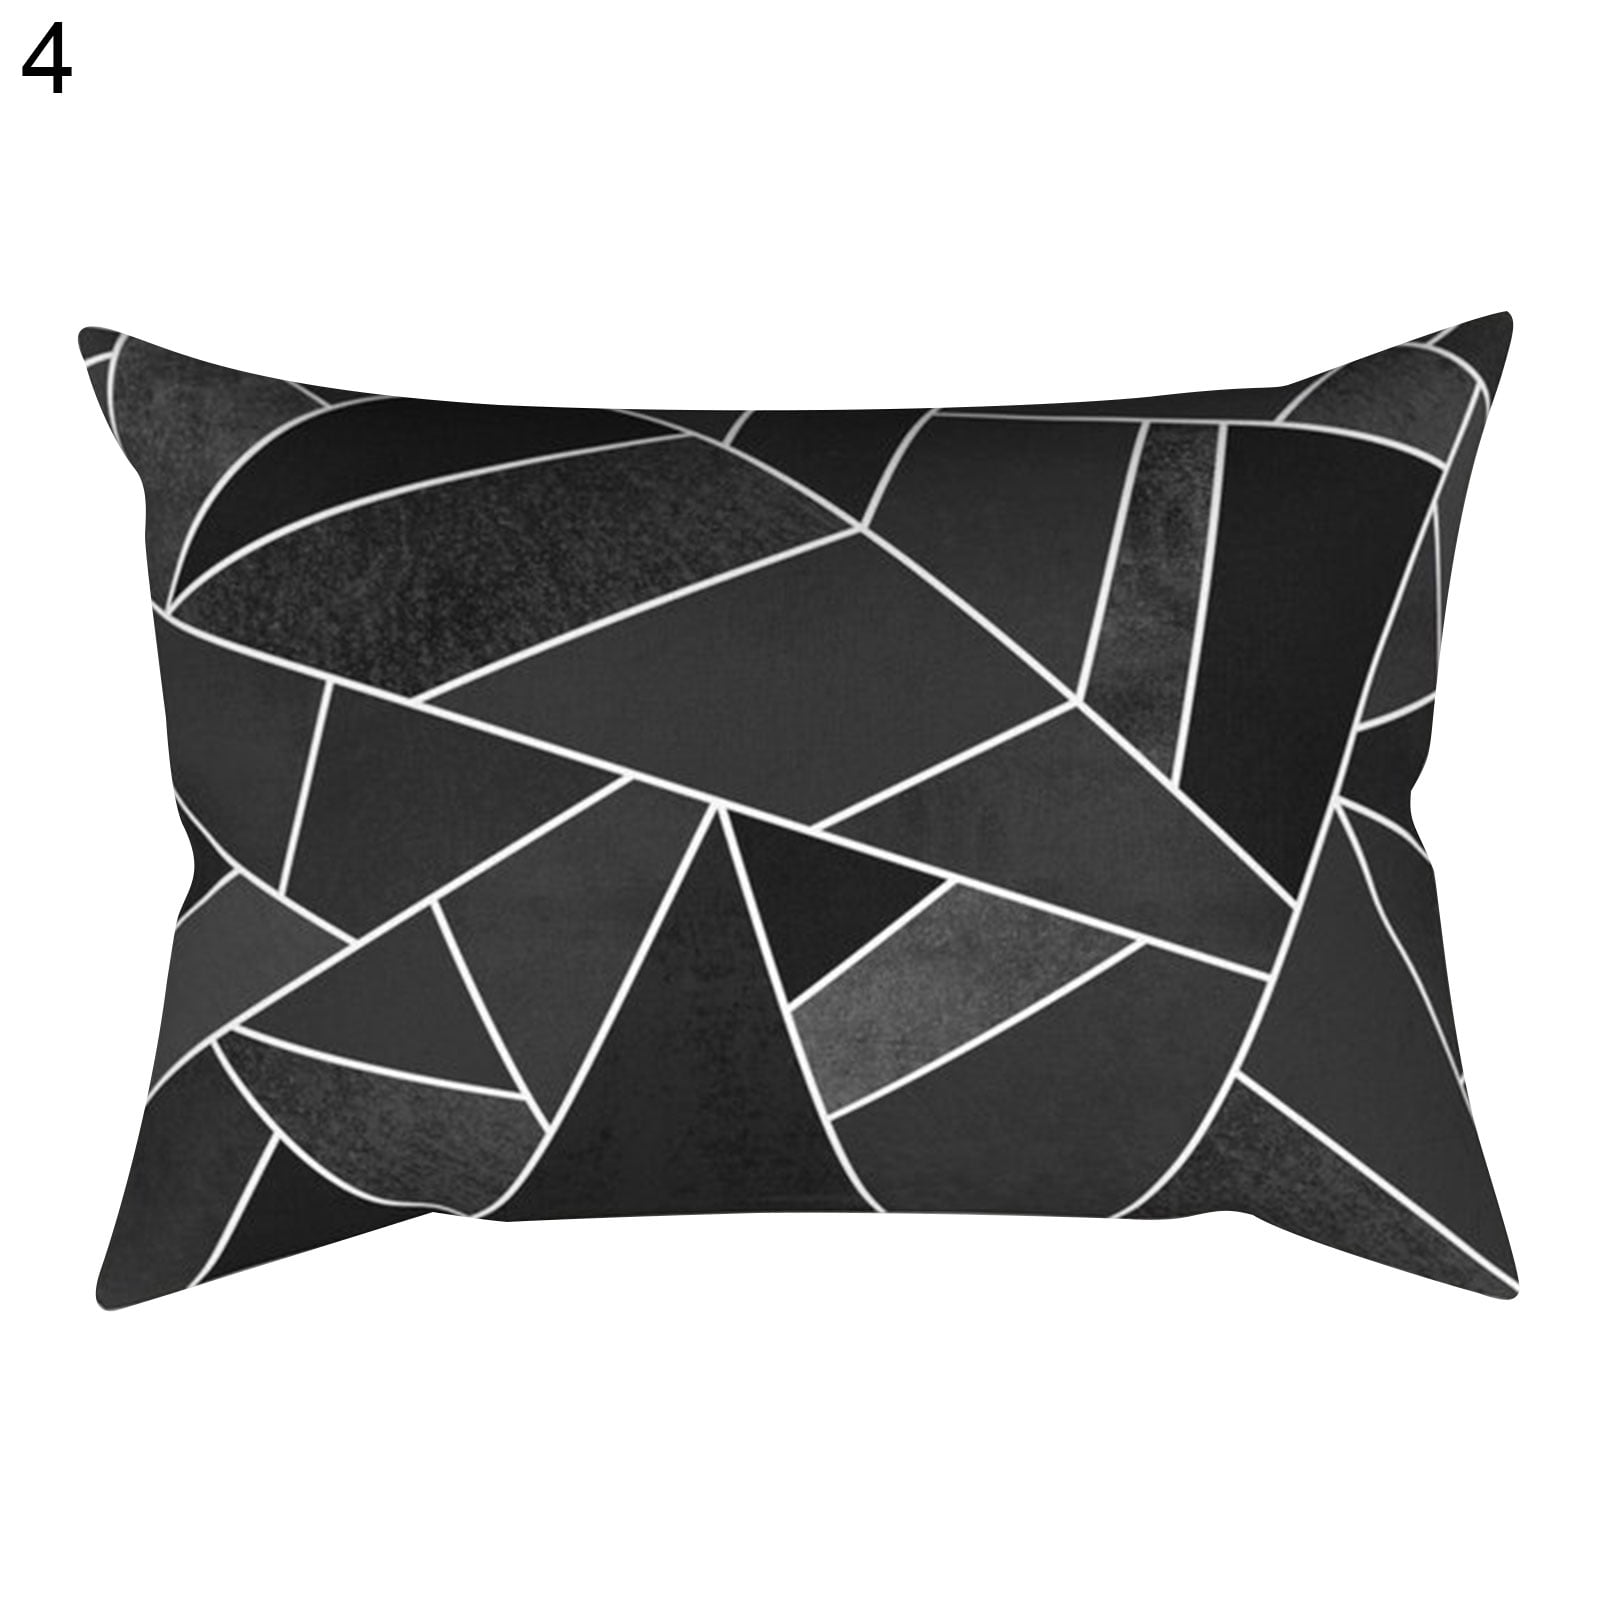 Details about   30*50cm Marble Texture Throw Cushion Cover Case Pillowslip Pillows Cover Decor 